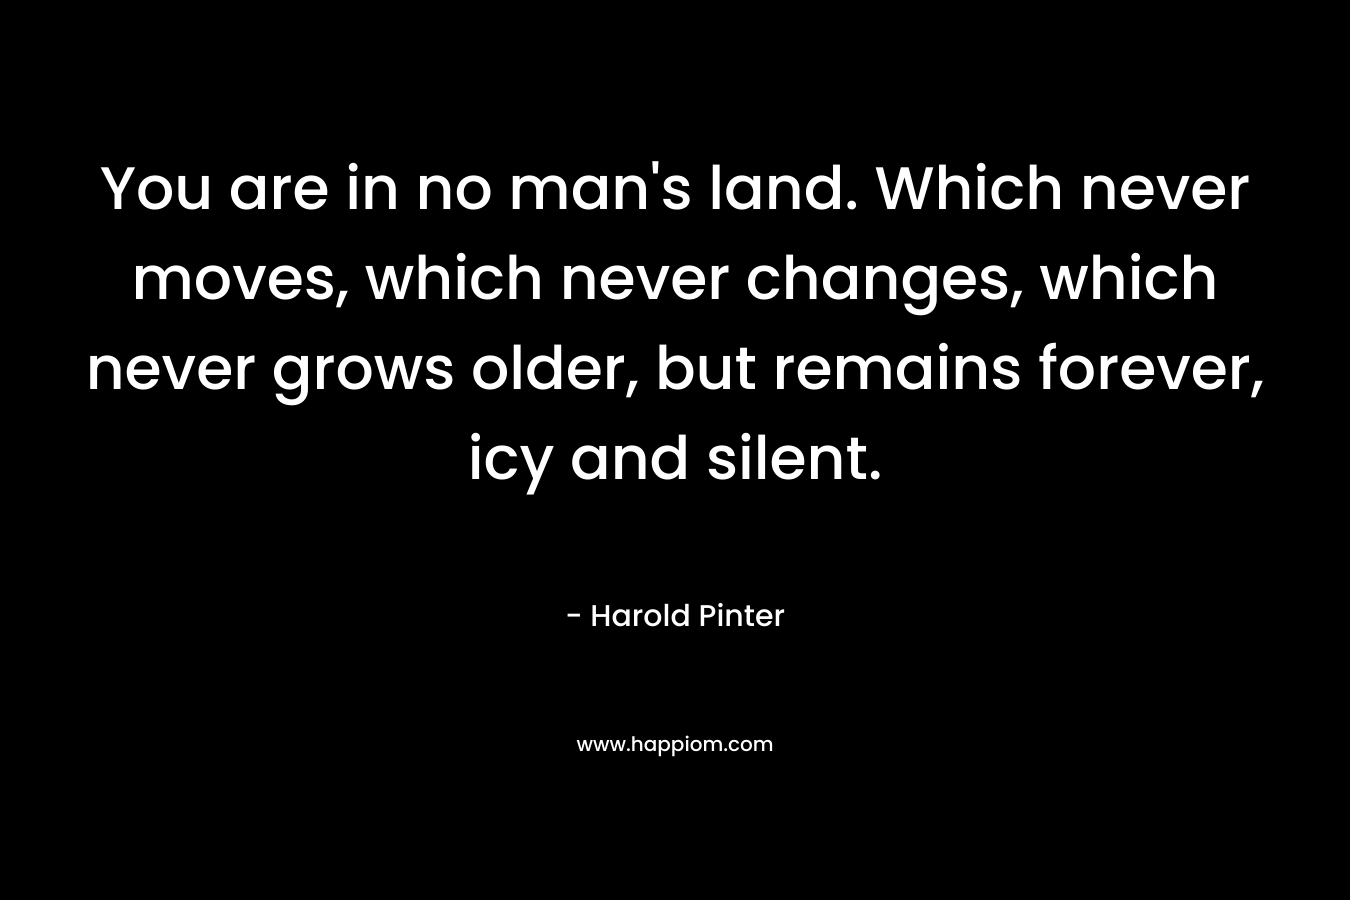 You are in no man’s land. Which never moves, which never changes, which never grows older, but remains forever, icy and silent. – Harold Pinter